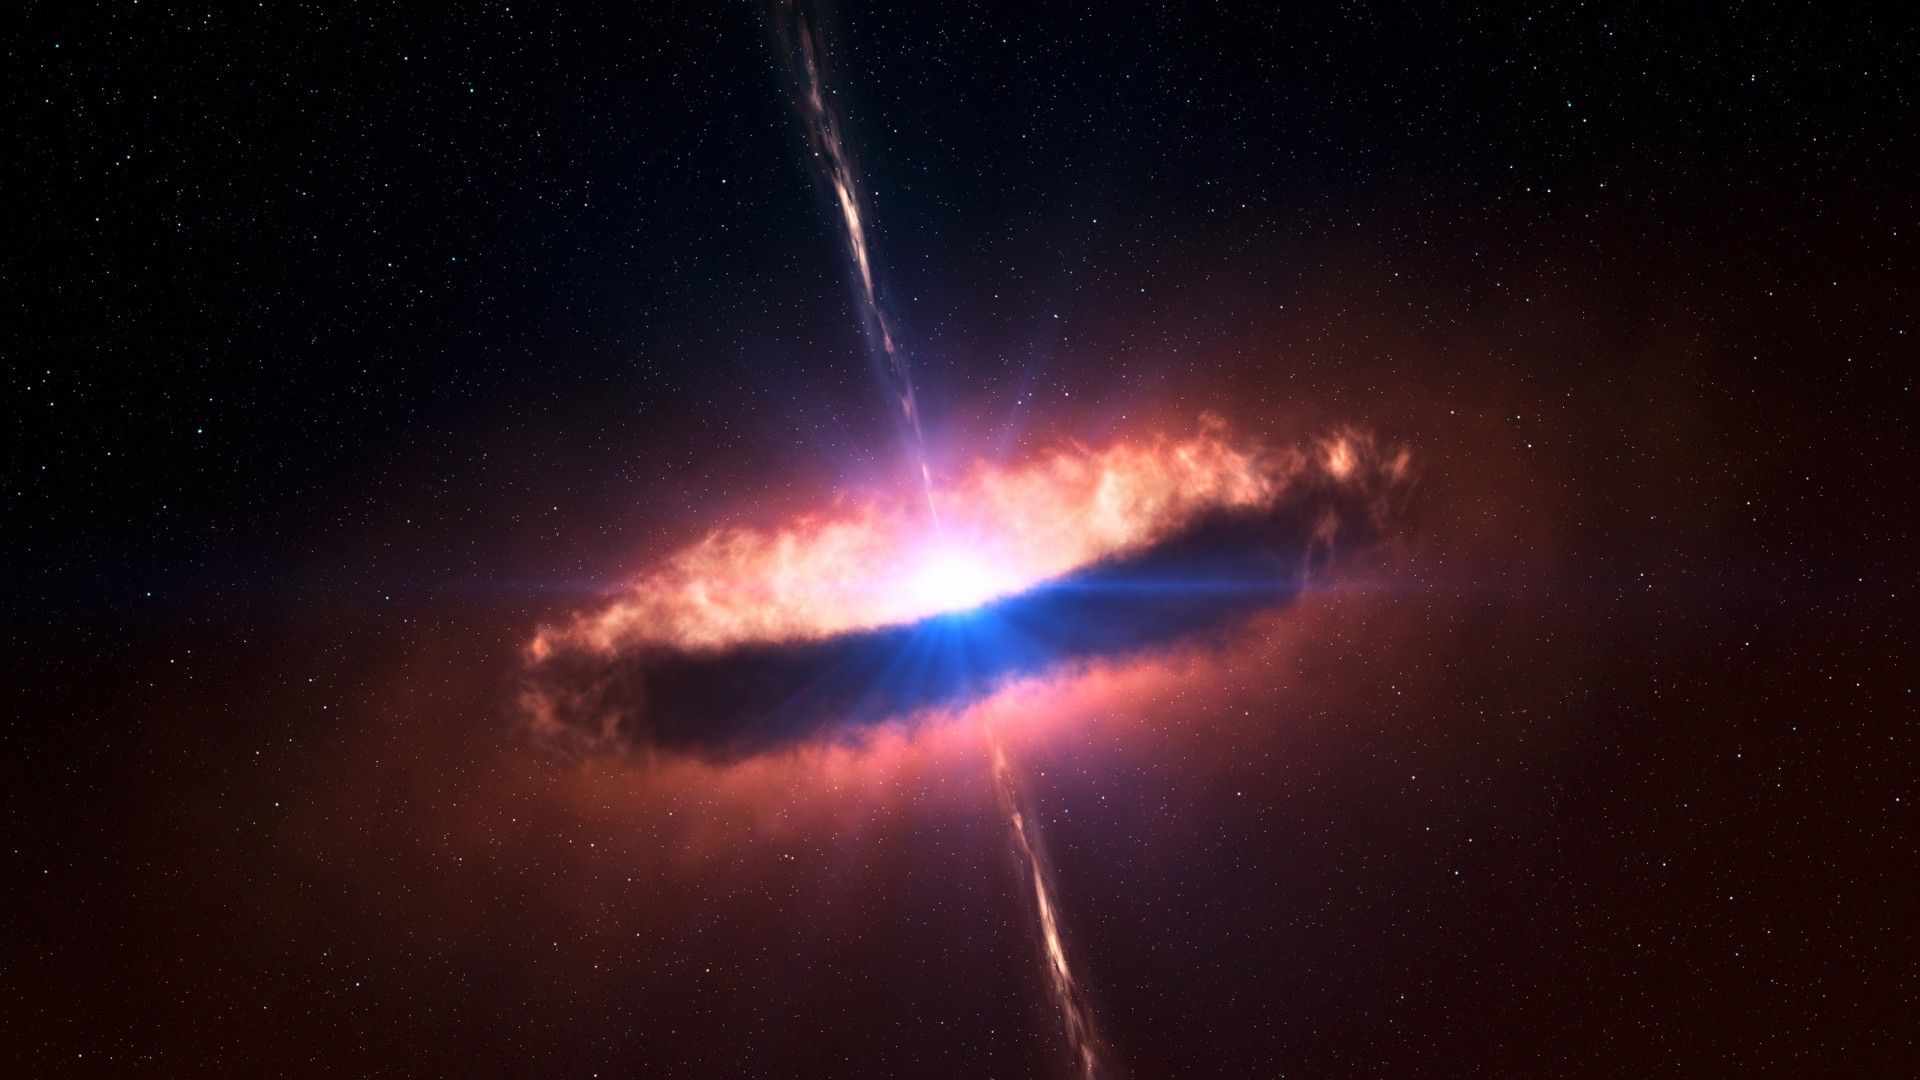 Quasar in deep space wallpapers and images - wallpapers, pictures ...